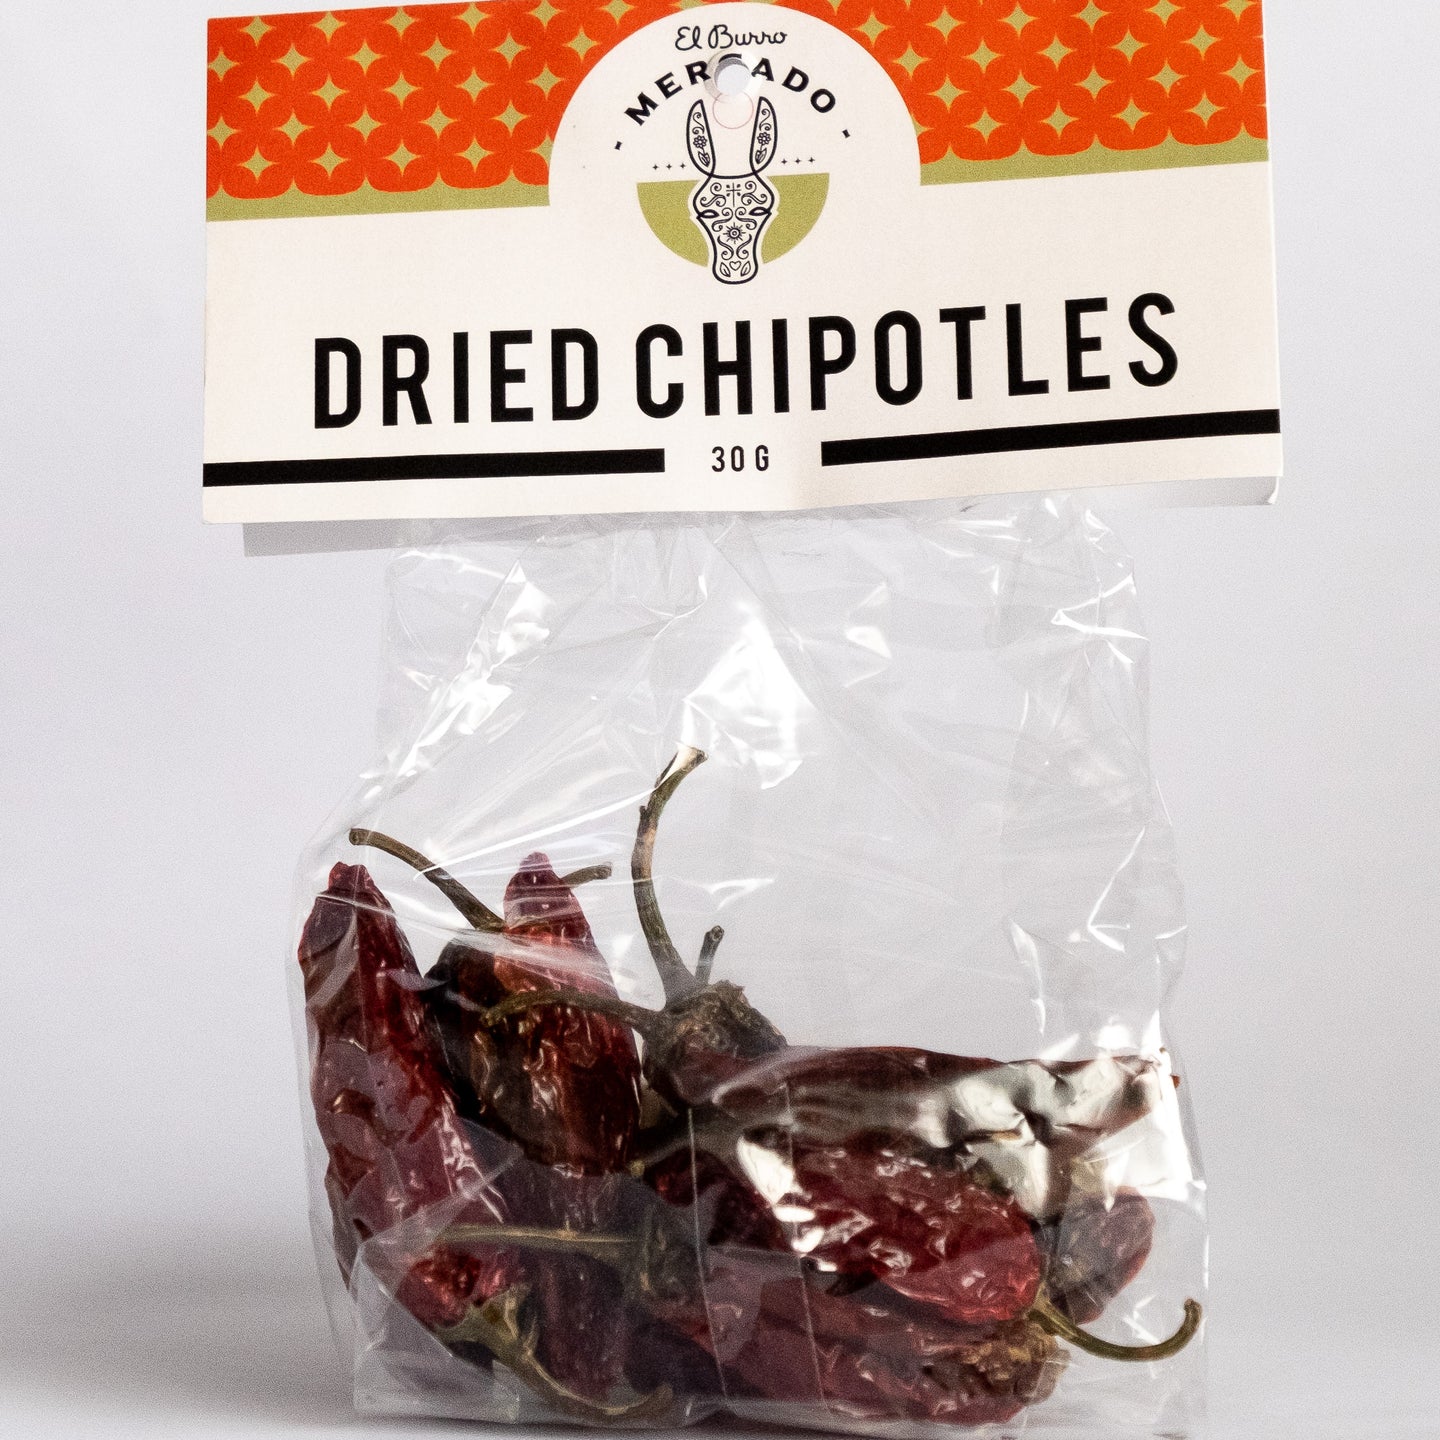 Dried Chipotle Chillies